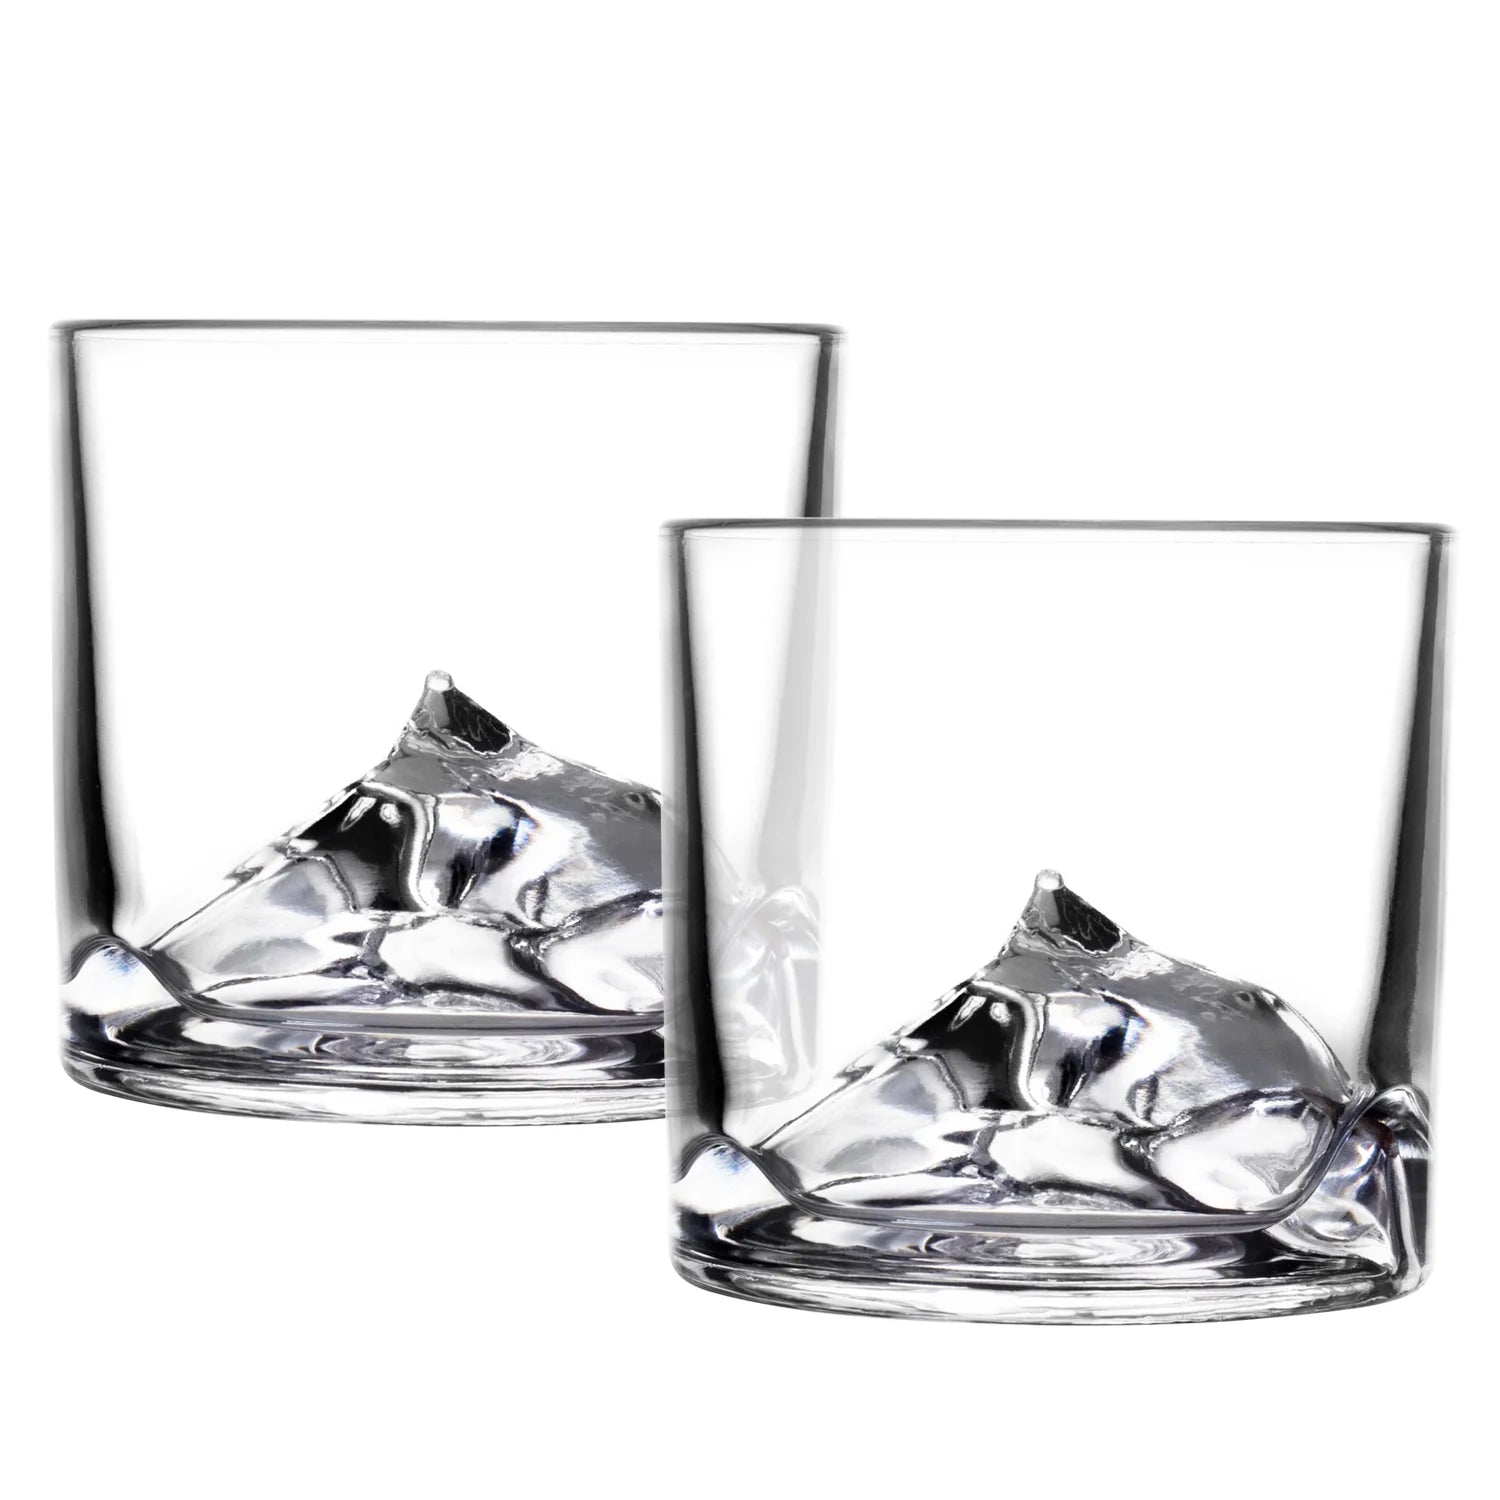 Grand Canyon Crystal Whiskey Glass - Set of 4